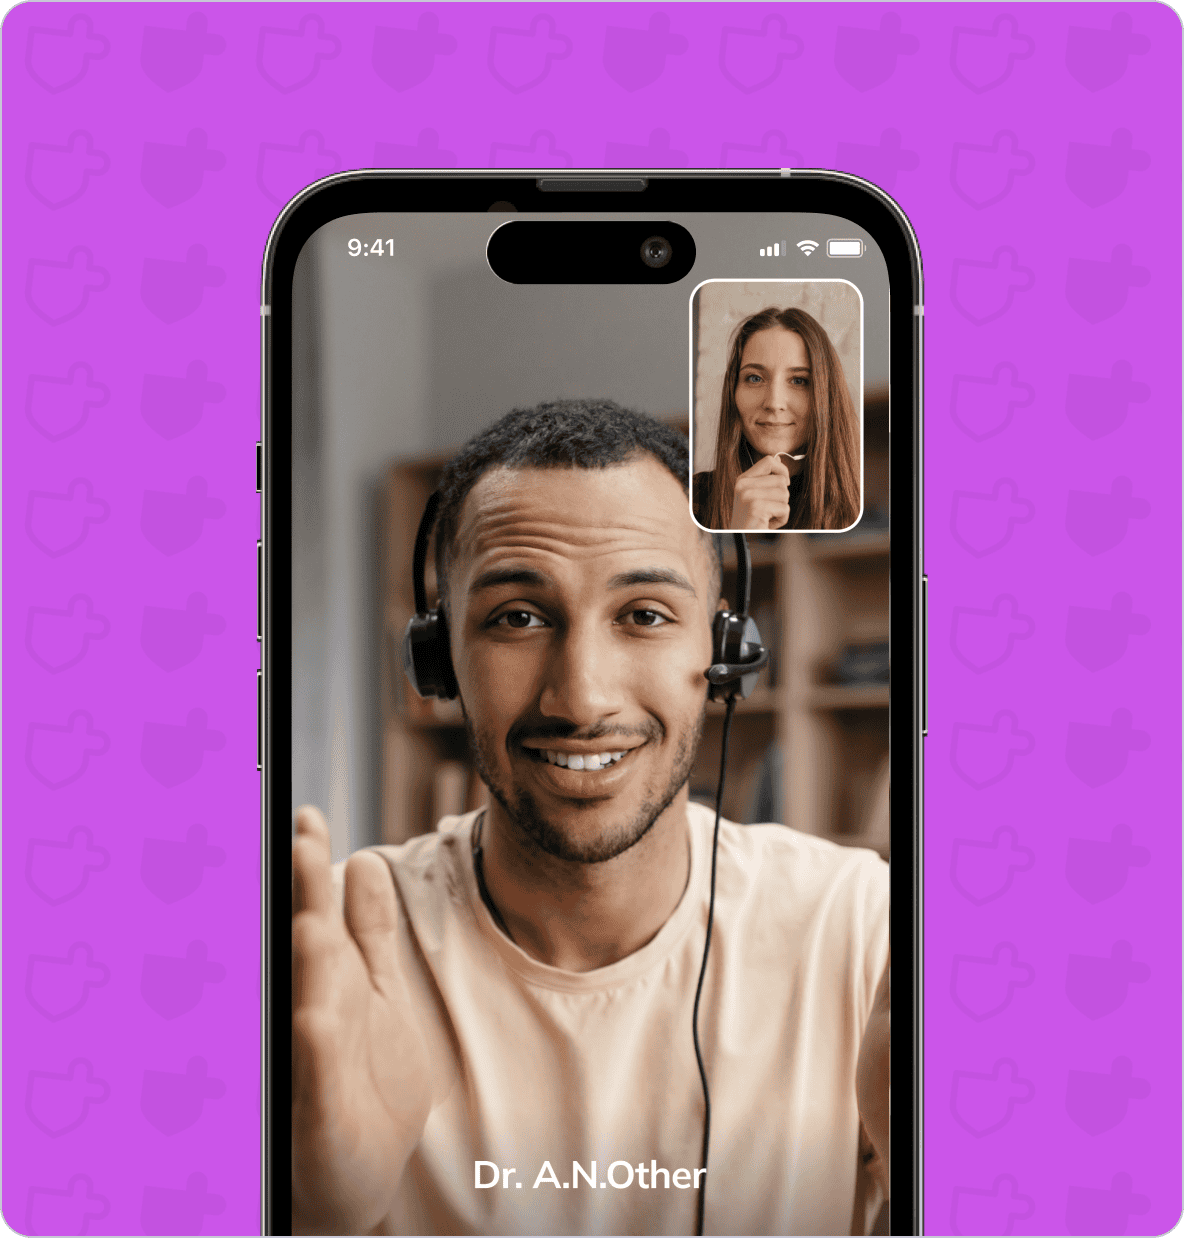 A smartphone screen shows a video call between a man wearing a headset and a woman. The man's label reads "Dr. A.N.Other". The background is purple with shield icons.